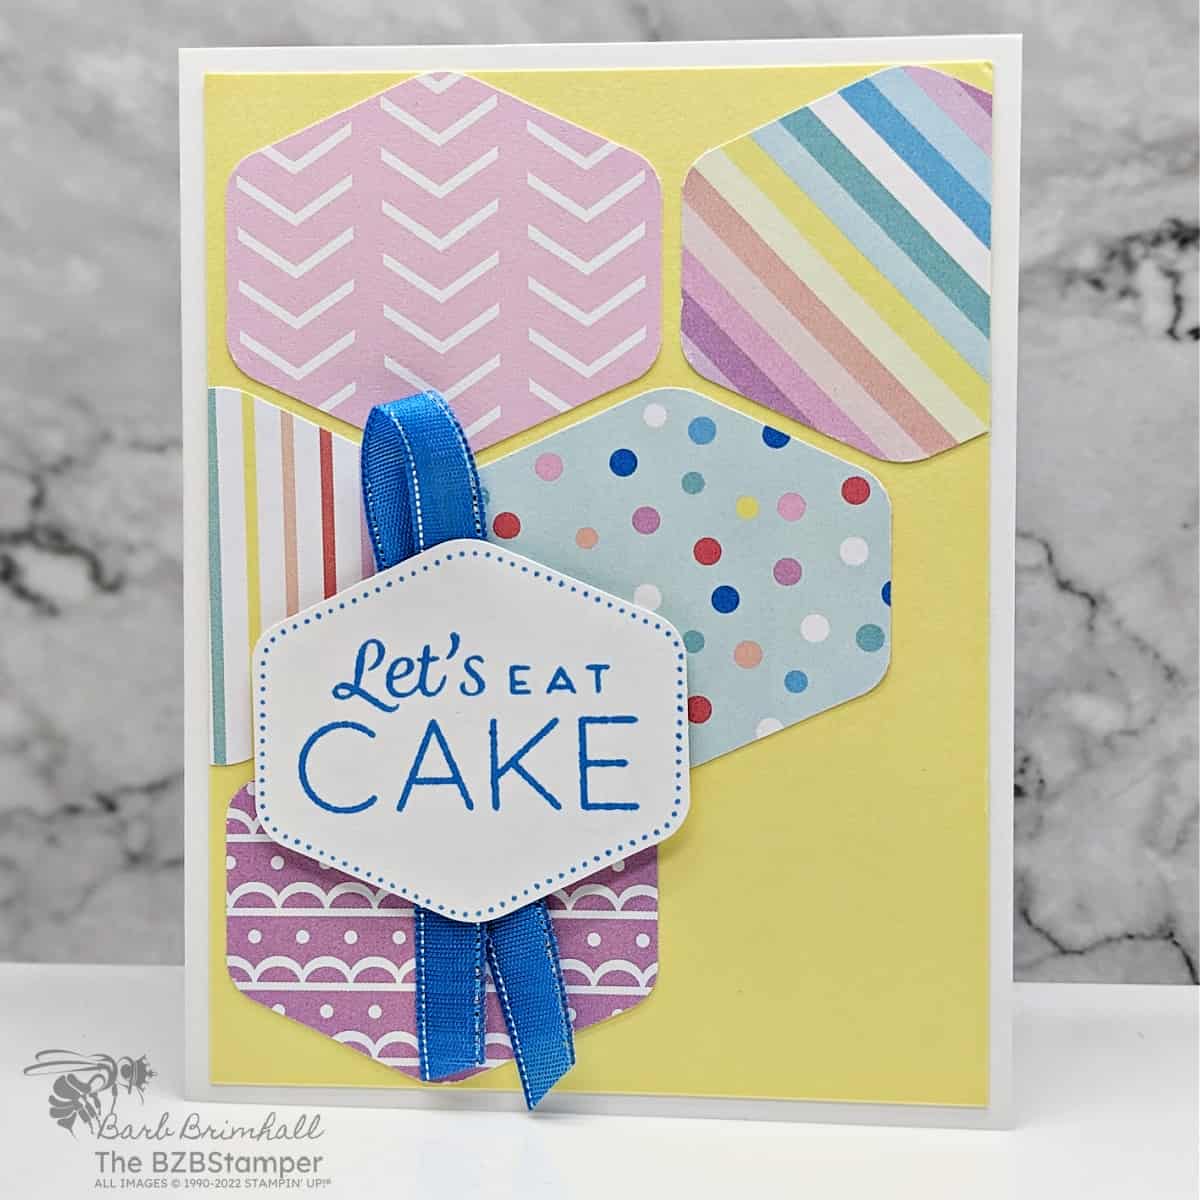 Heartfelt Hexagon Birthday Card featuring hexganon shapes punched from pretty paper in a variety of colors including blue and yellow.  Sentiment is "let's eat cake".